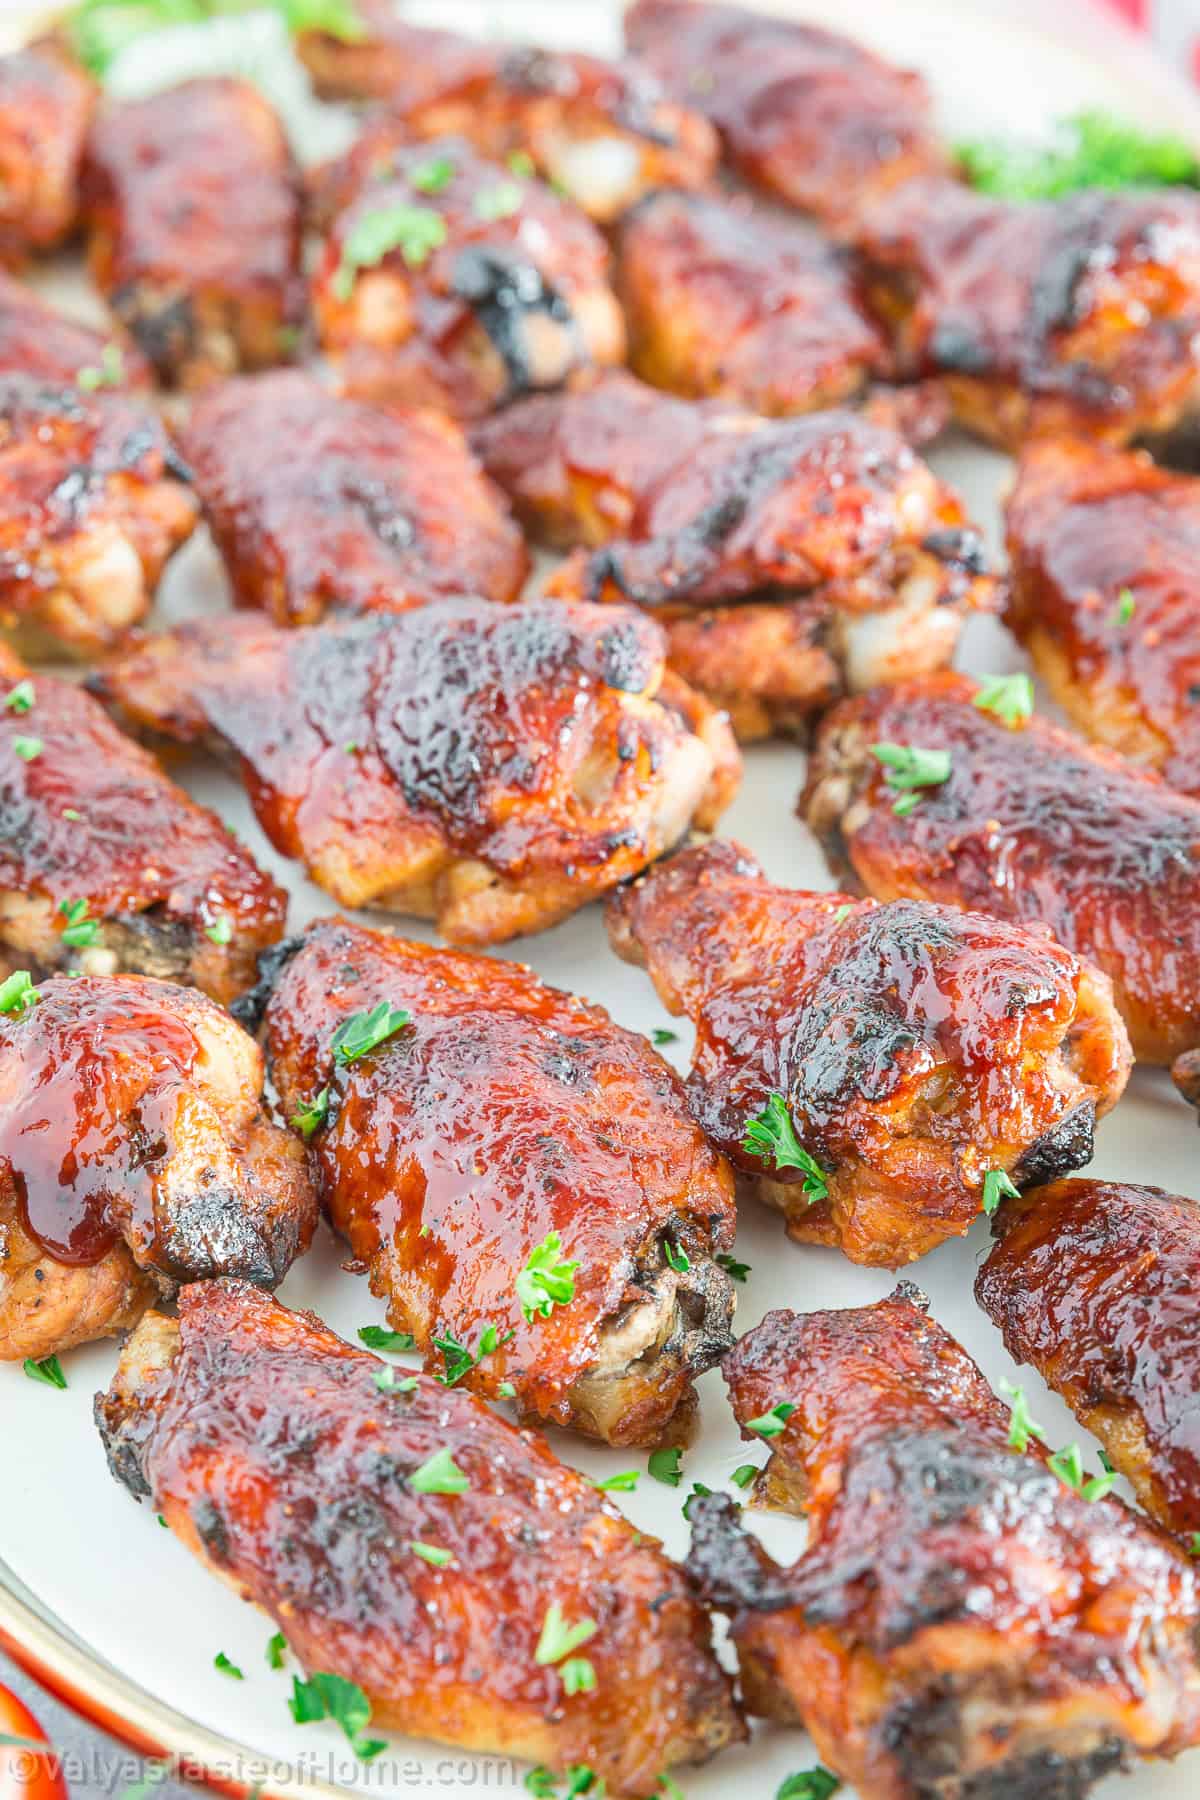 hese wings are a family favorite. They're perfect for a casual family meal, and the leftovers (if there are any!) are great for packed lunches.